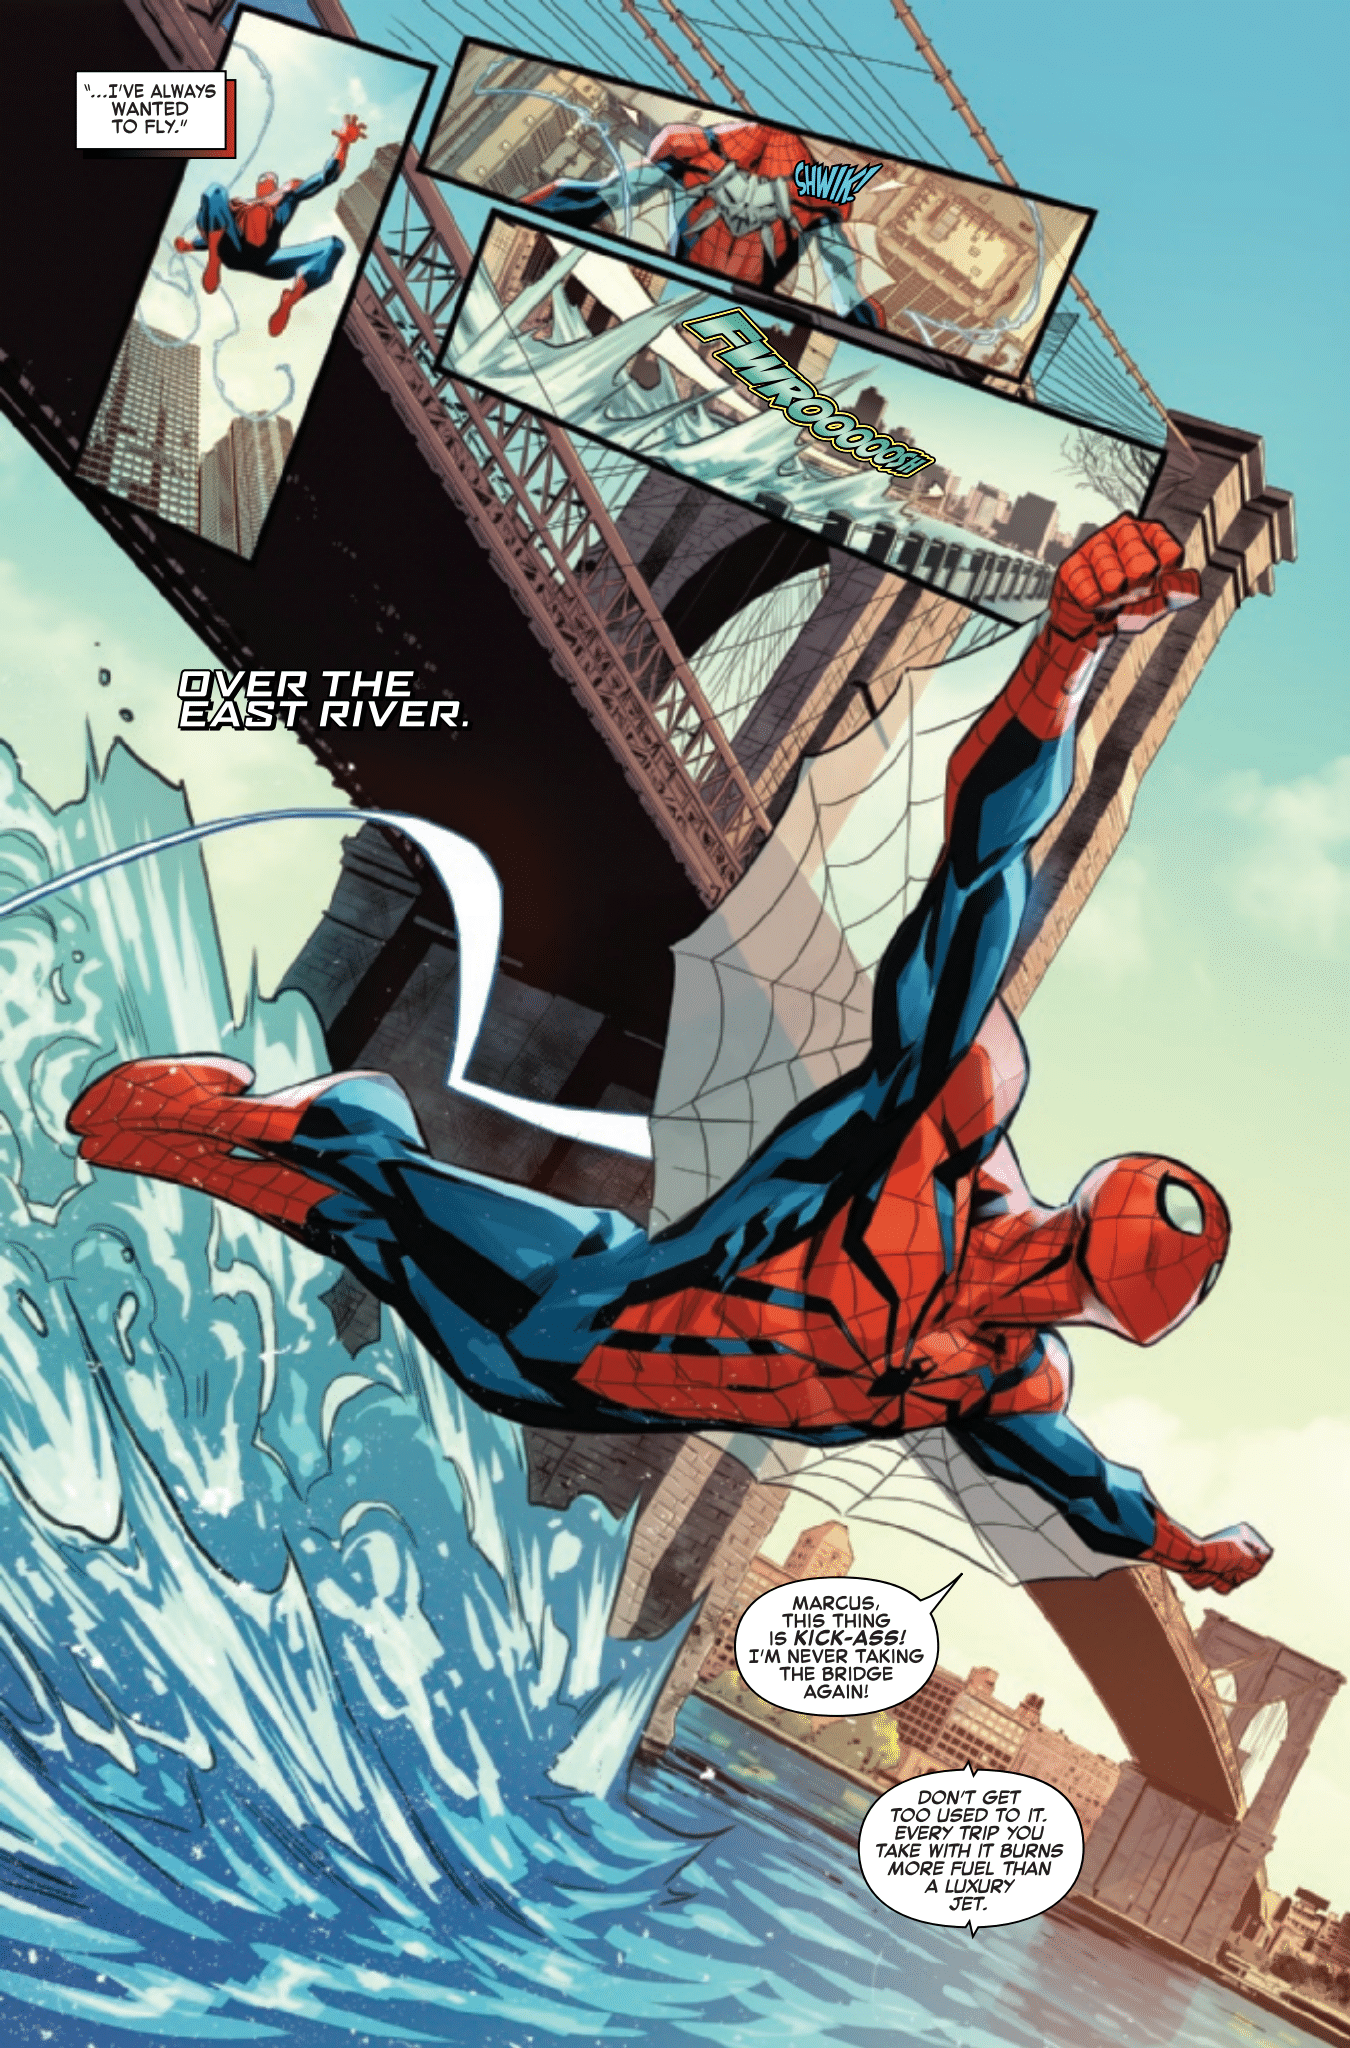 Ben Reilly tests out his new wings in The Amazing Spider-Man #81